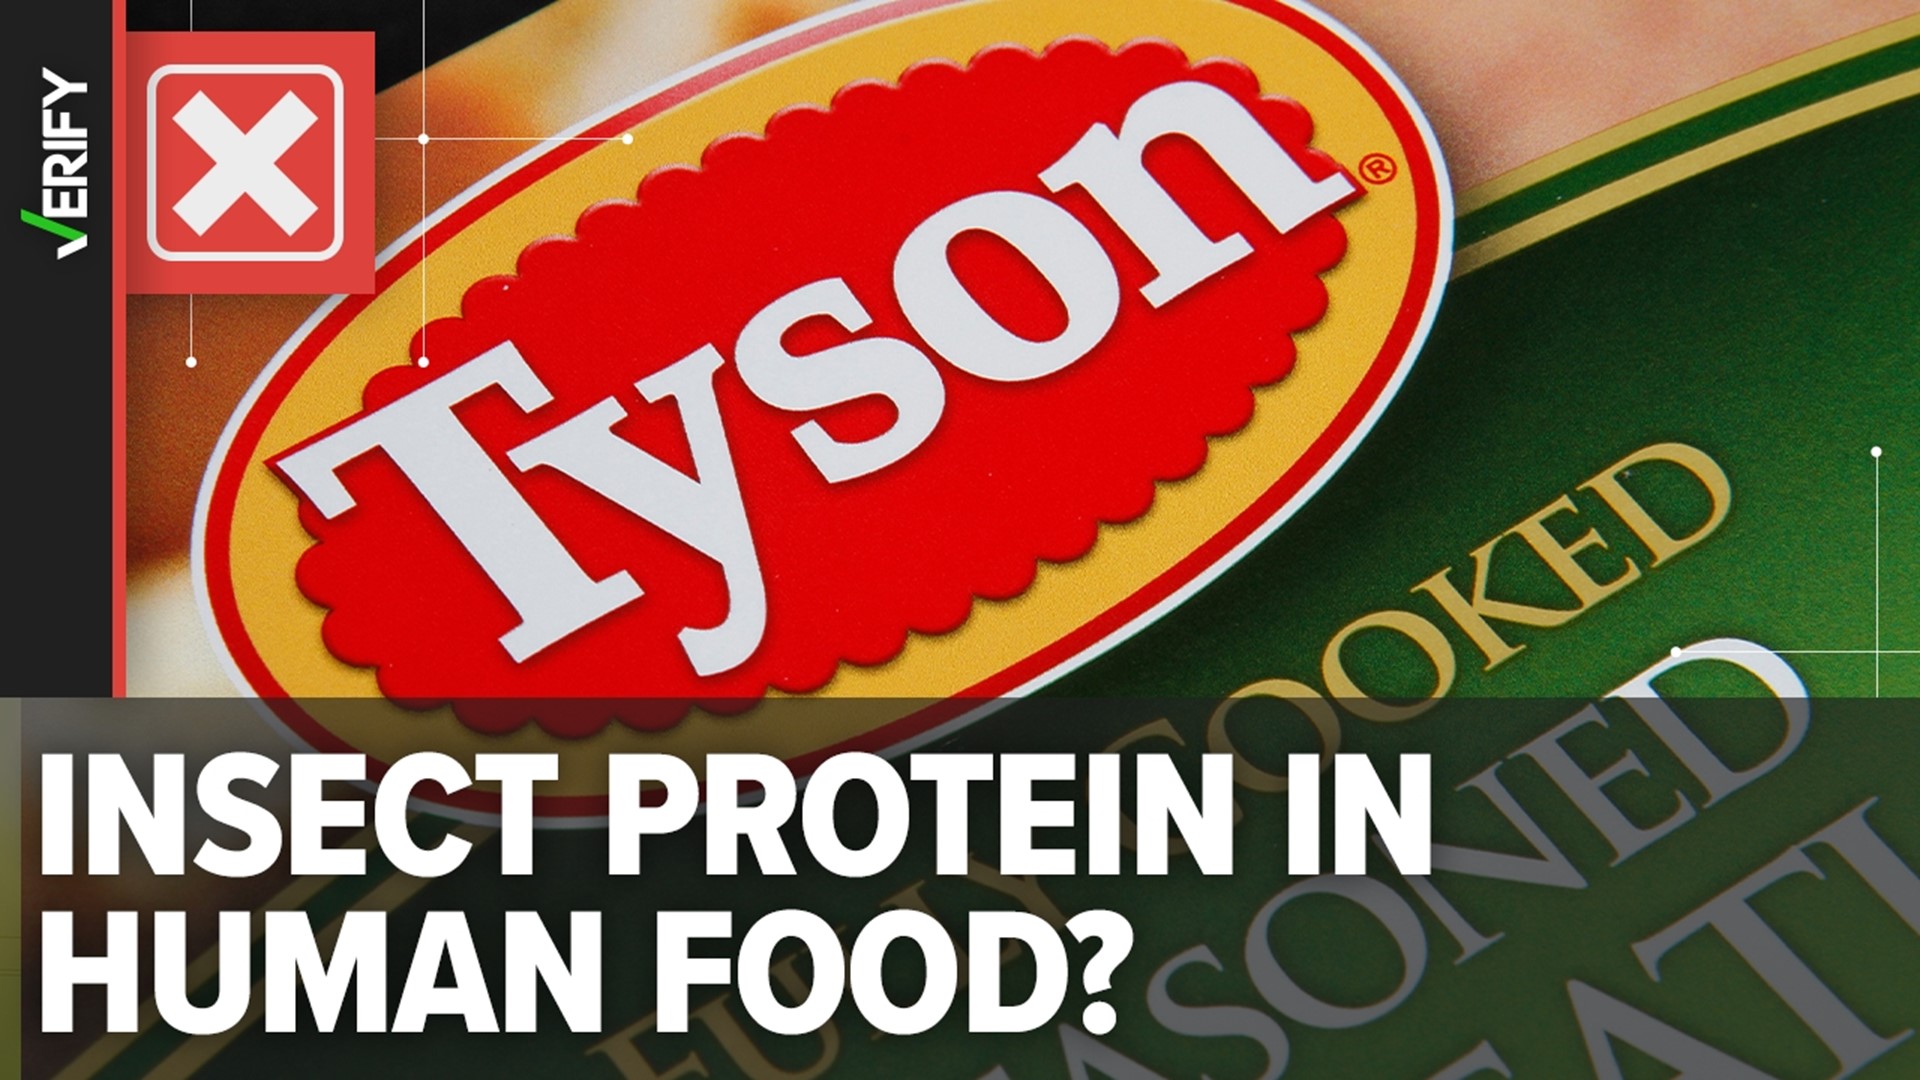 Tyson Foods and Protix, an insect protein company, entered into a partnership to build an insect ingredient facility in the U.S. to produce animal feed and pet food.